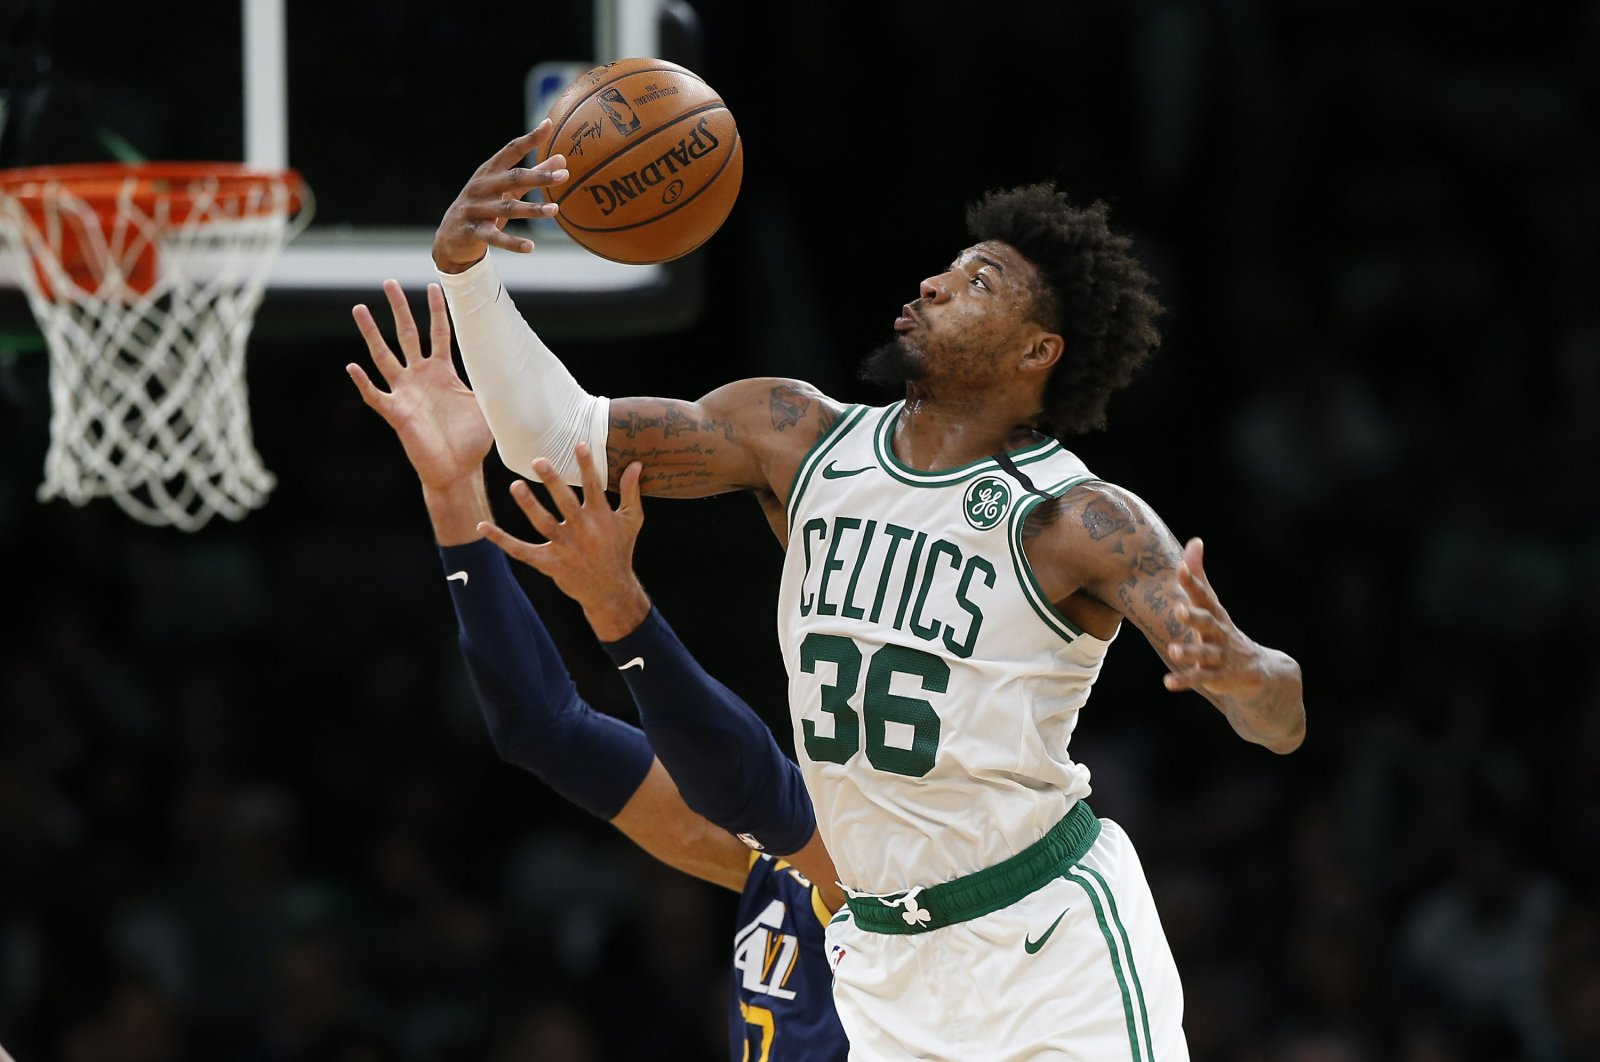 Boston Celtics' Marcus Smart (36) gathers in a rebound against the Utah Jazz during an NBA game, in Boston, March 6, 2020. (AP Photo)